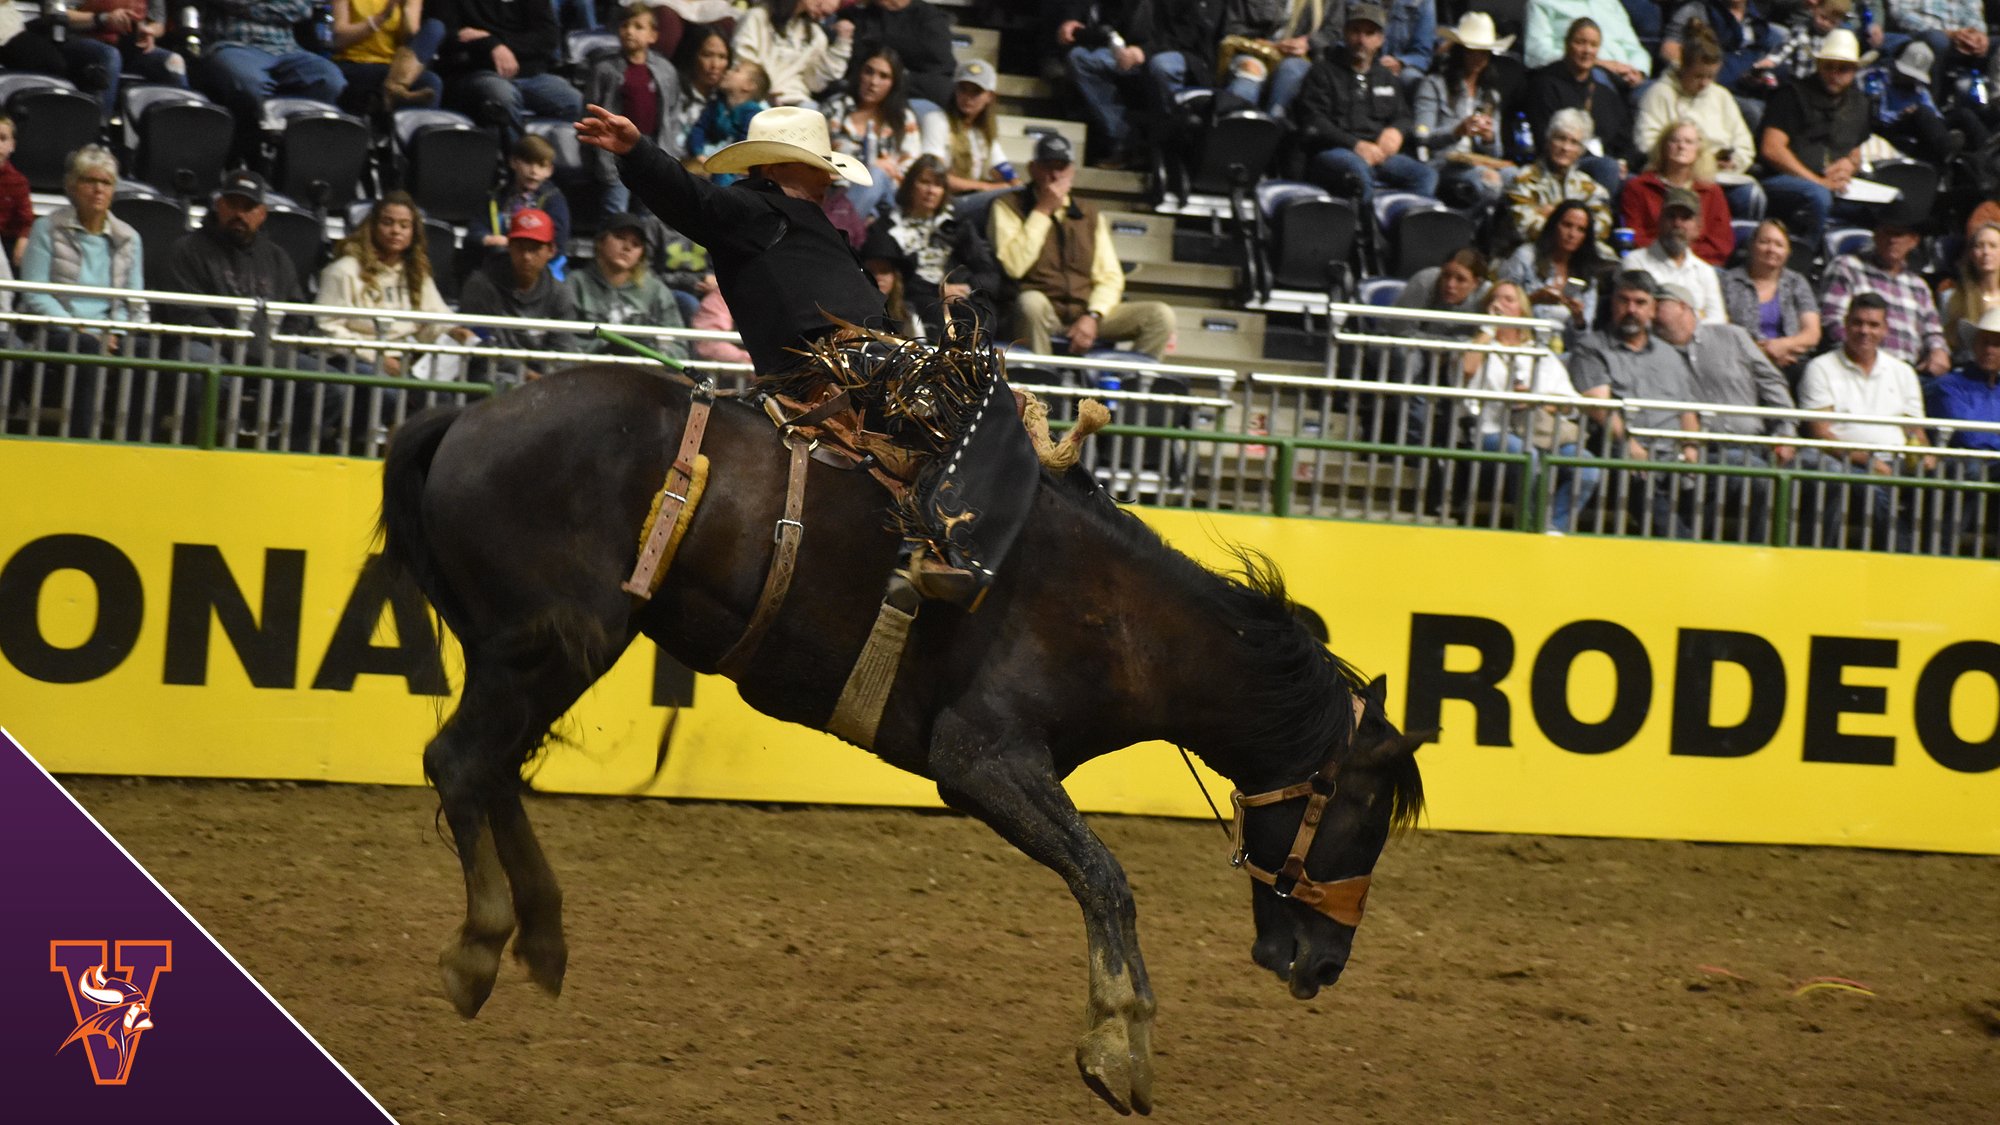 Three Rodeo Performances Thursday At CNFR